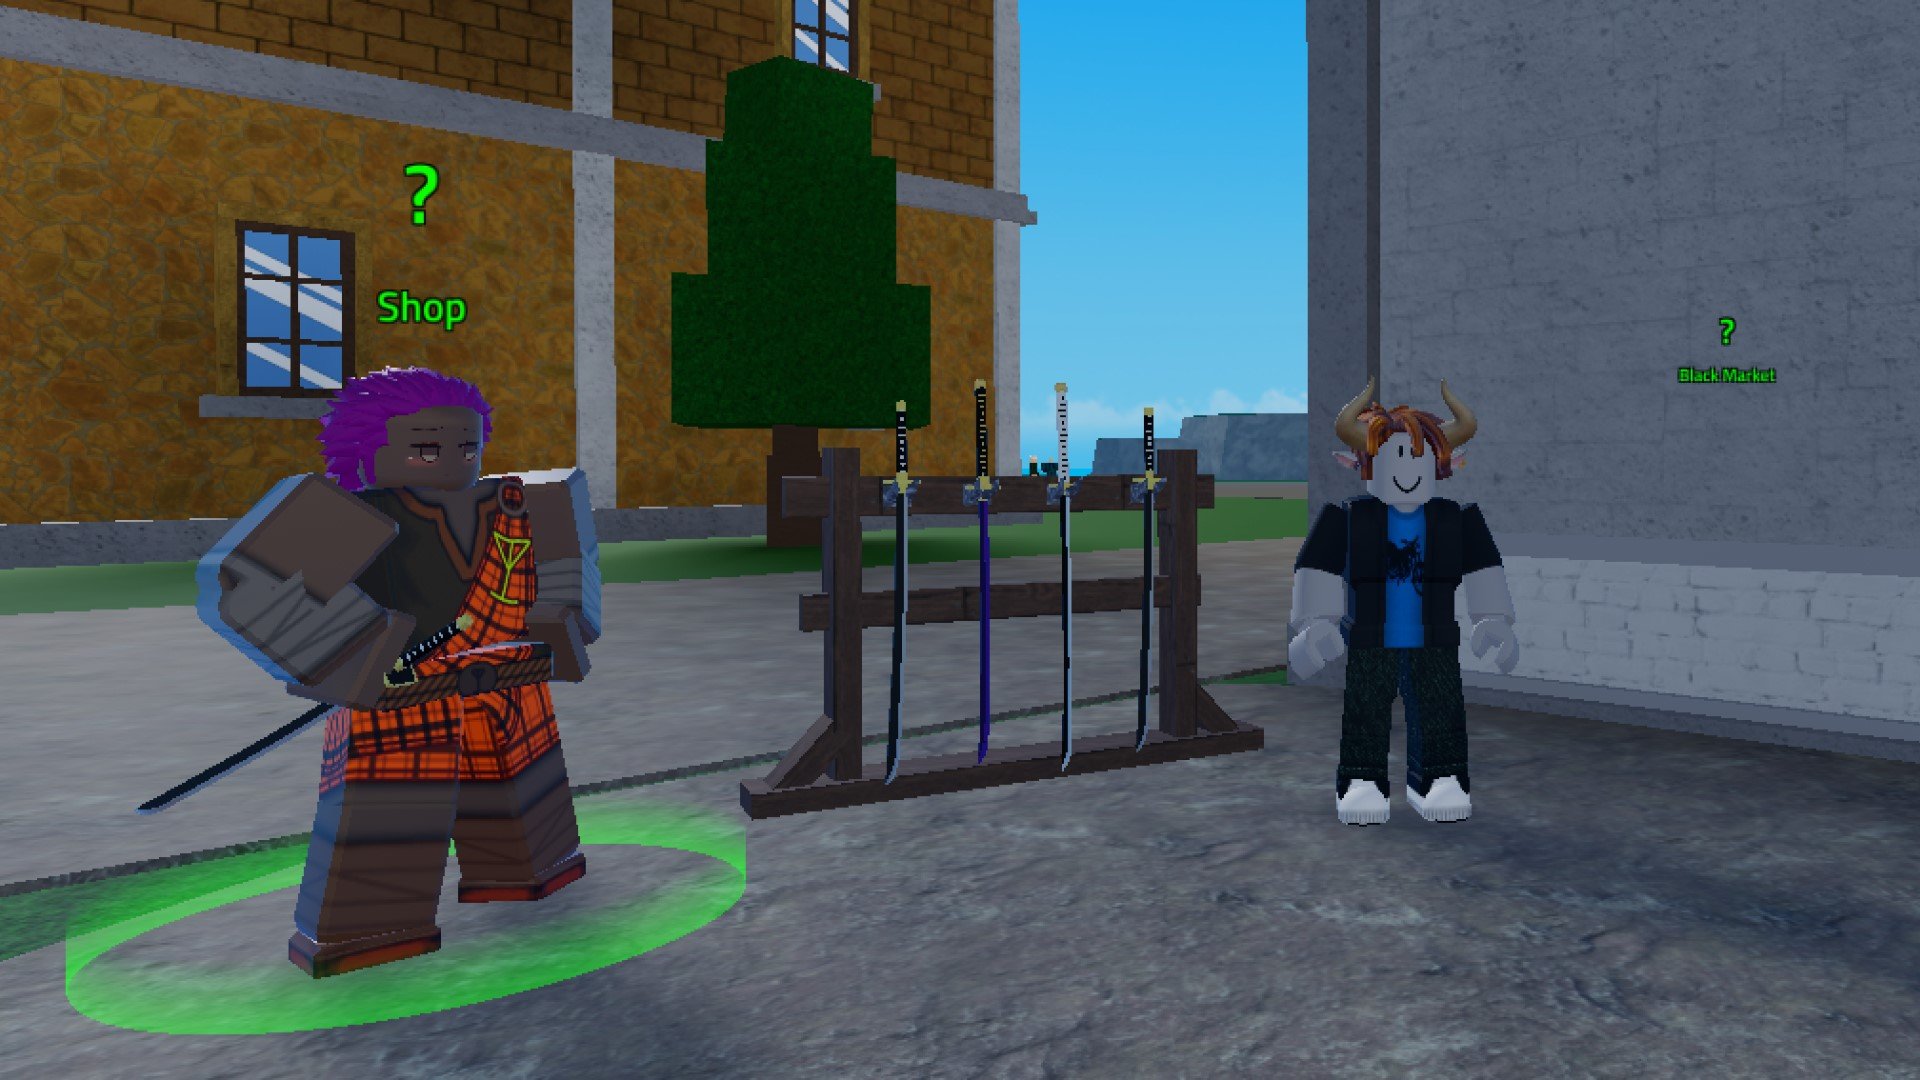 A character from Robloc game King Legacy standing next to a rack of swords in an urban area.